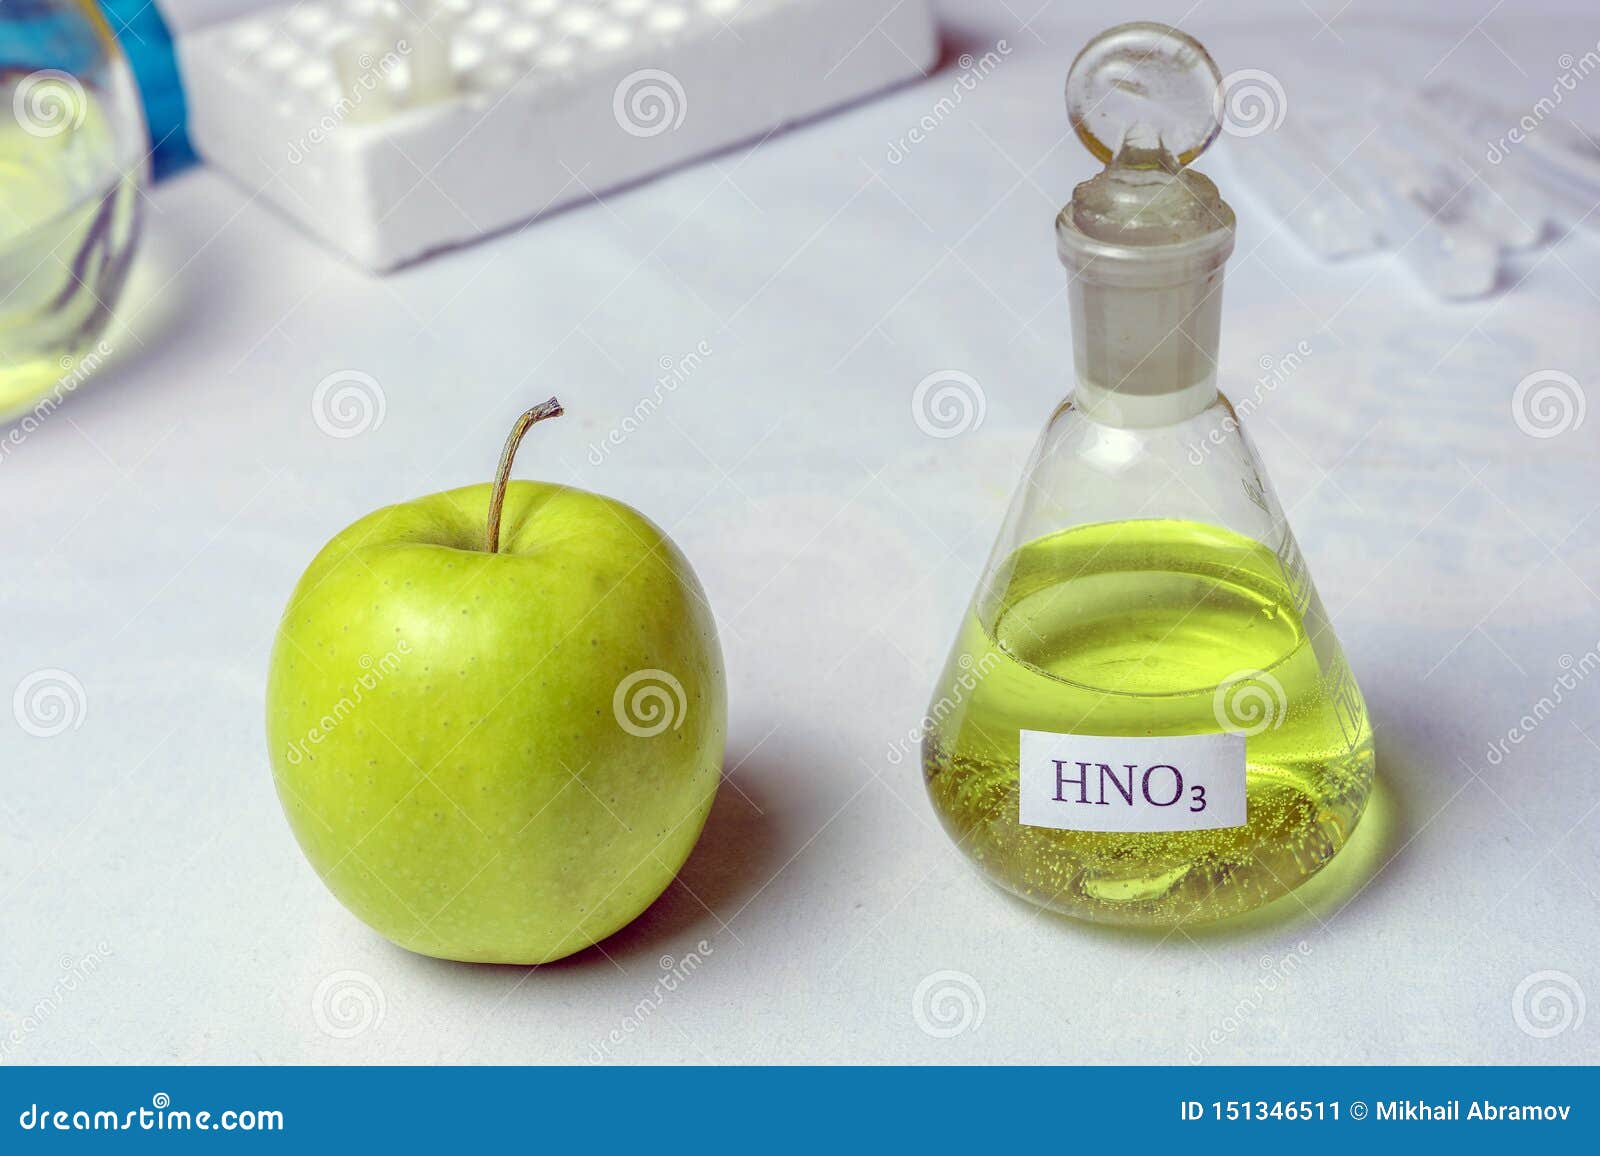 an apple and a chemical flask labeled nitric acid - nitrate. the concept of the presence of nitrates and gmos